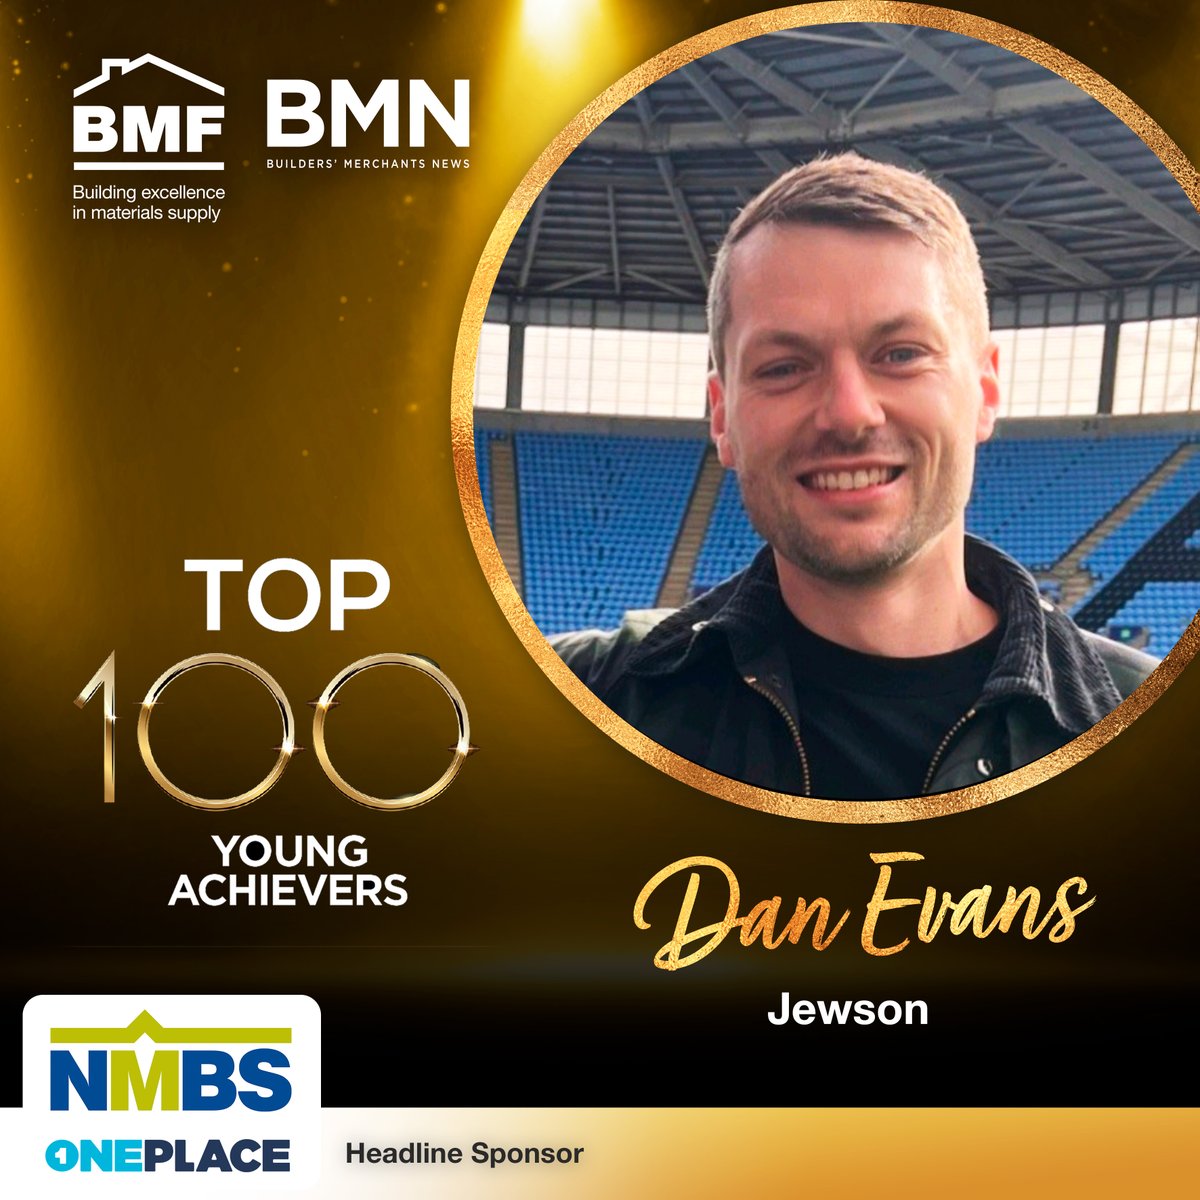 Our next BMF and @BMerchantsNews Top 100 Young Achievers is Dan Evans, Category Manager at @Jewson. Head sponsor, @NationalMerch #Top100YoungAchiever